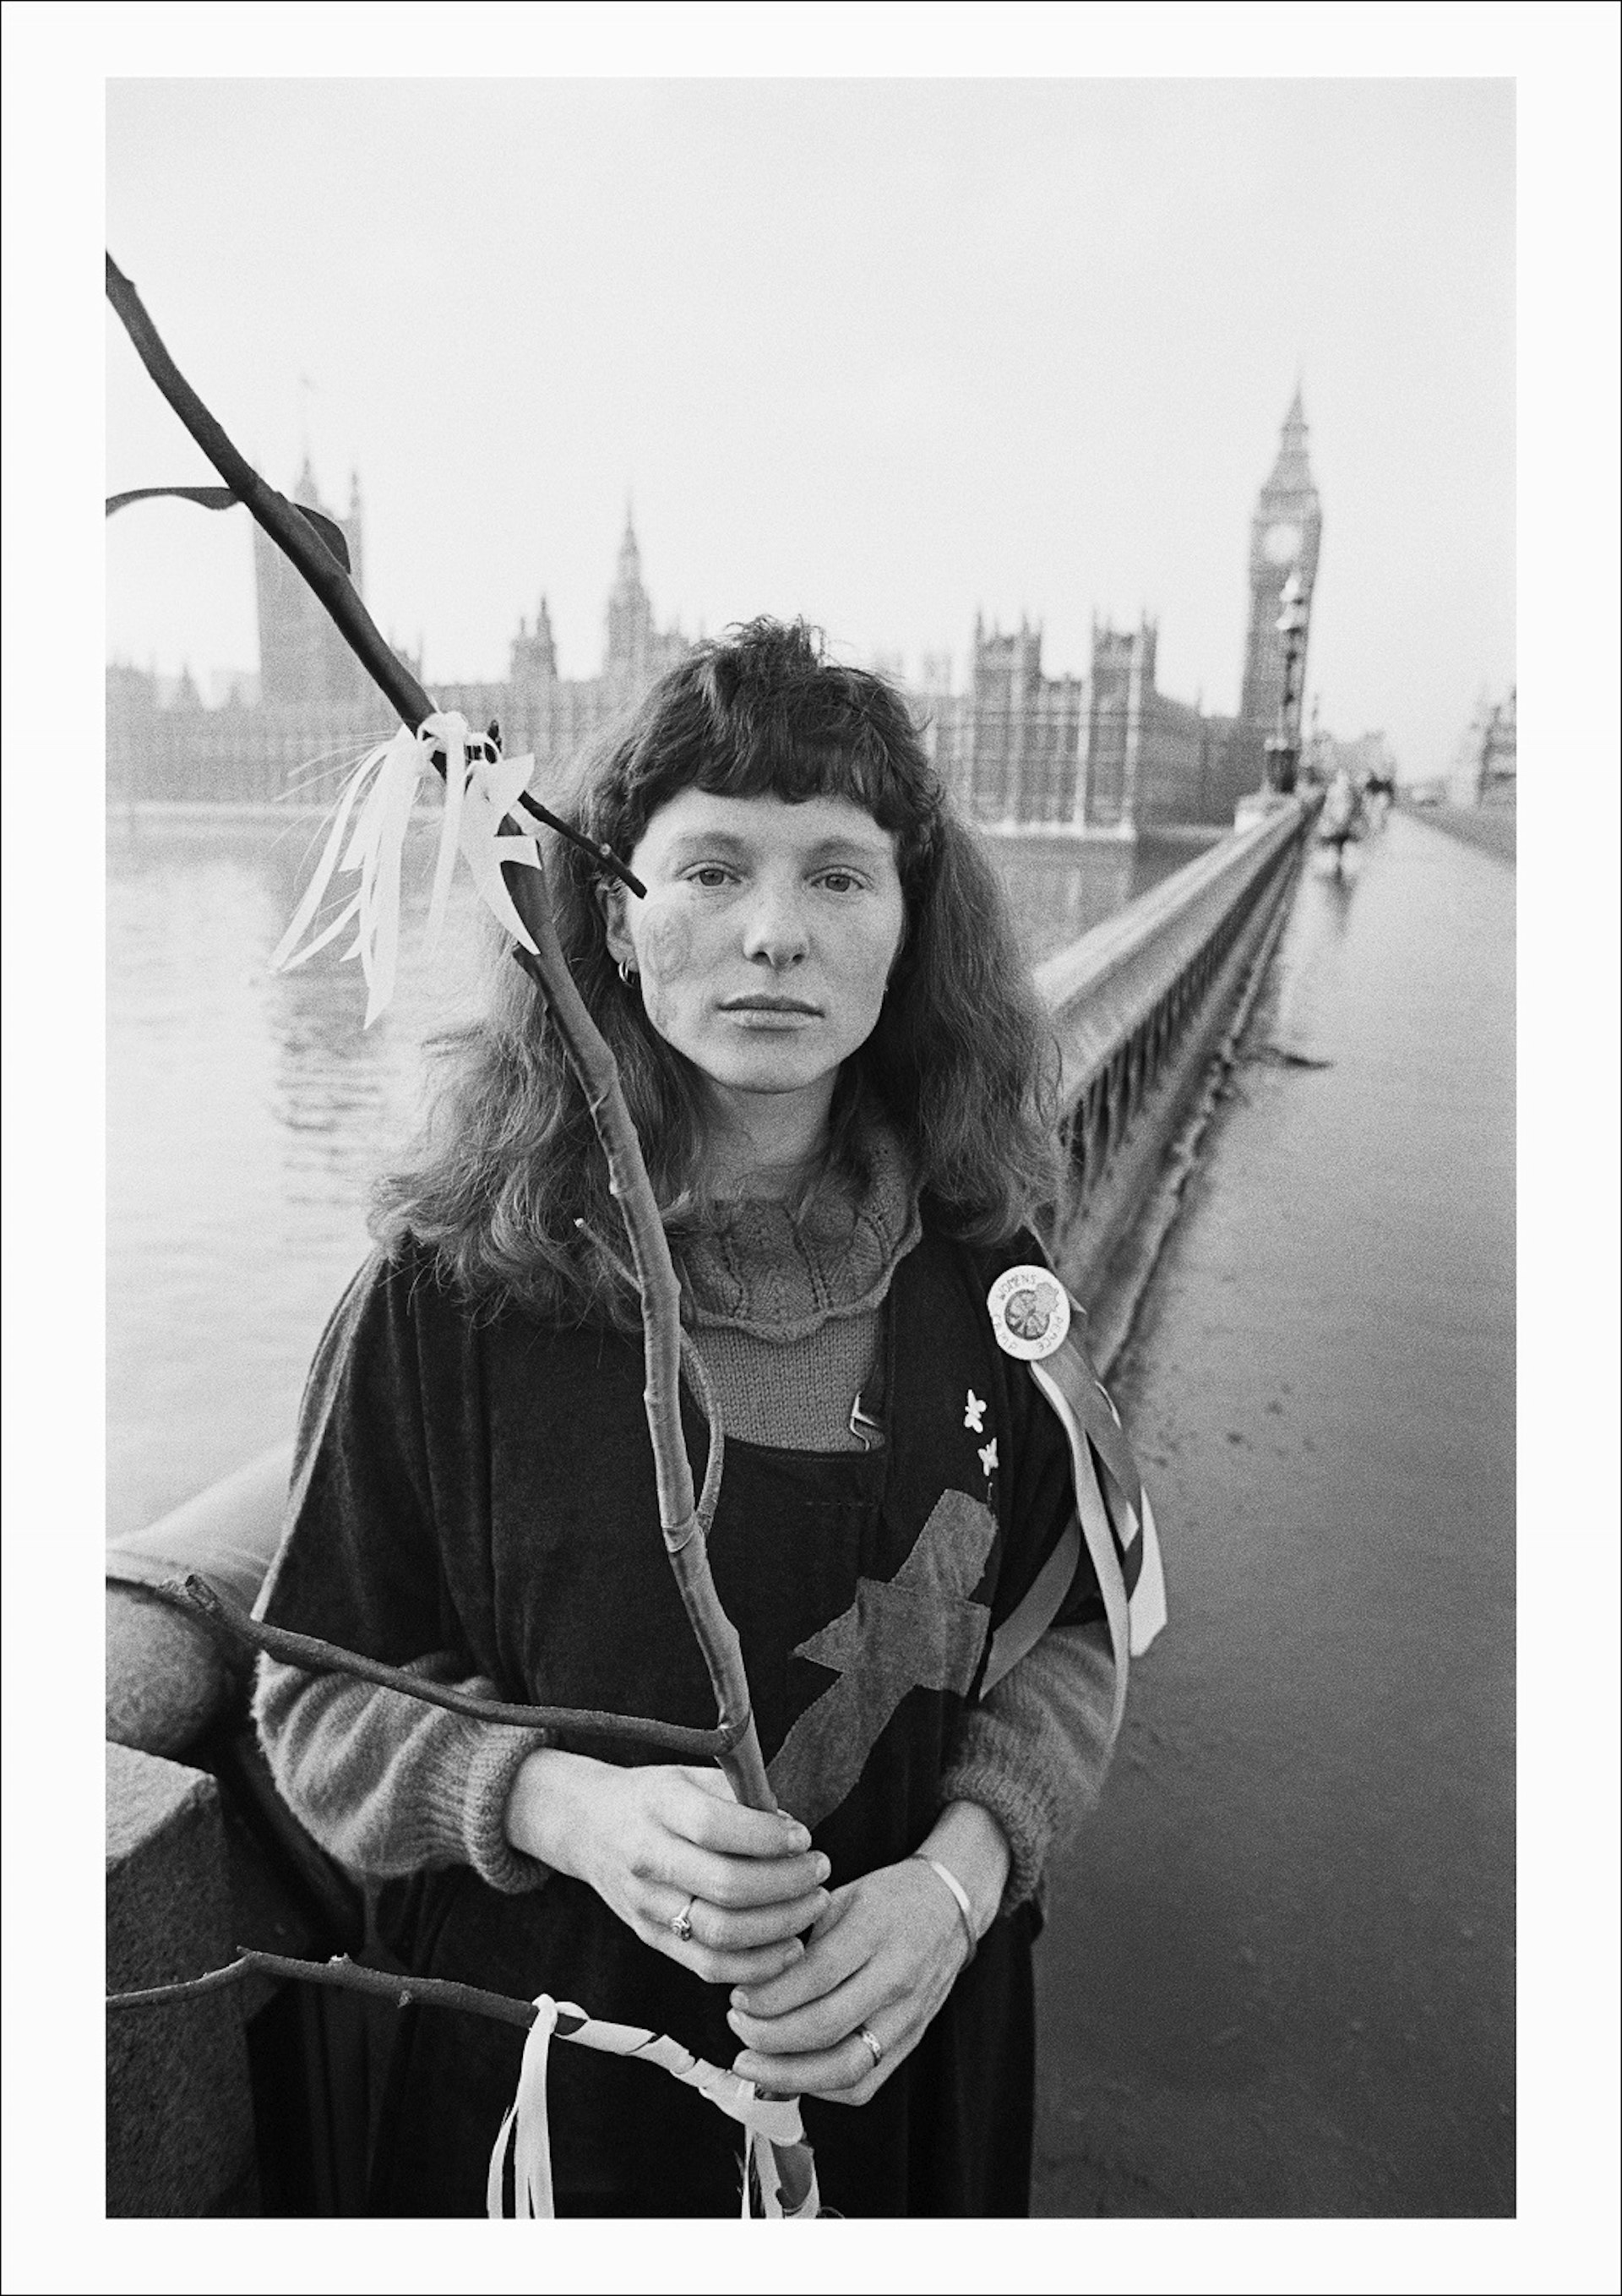 A protester from the Women's Peace Camp at RAF/USAF Greenham Common after keening in Parliament Square, Westminster, London, 1982